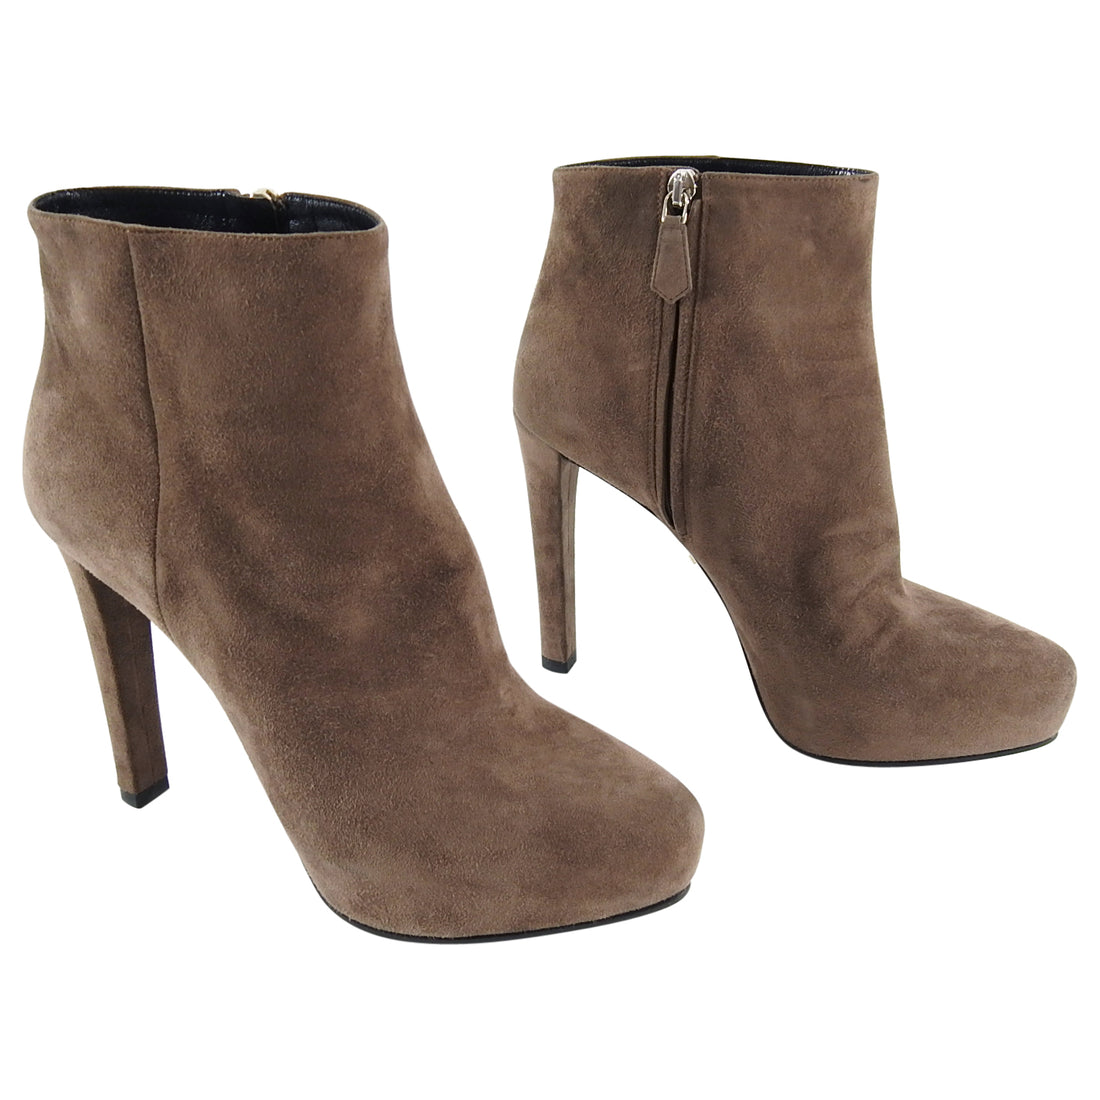 Prada Light Brown Suede Ankle Boots - 37.5